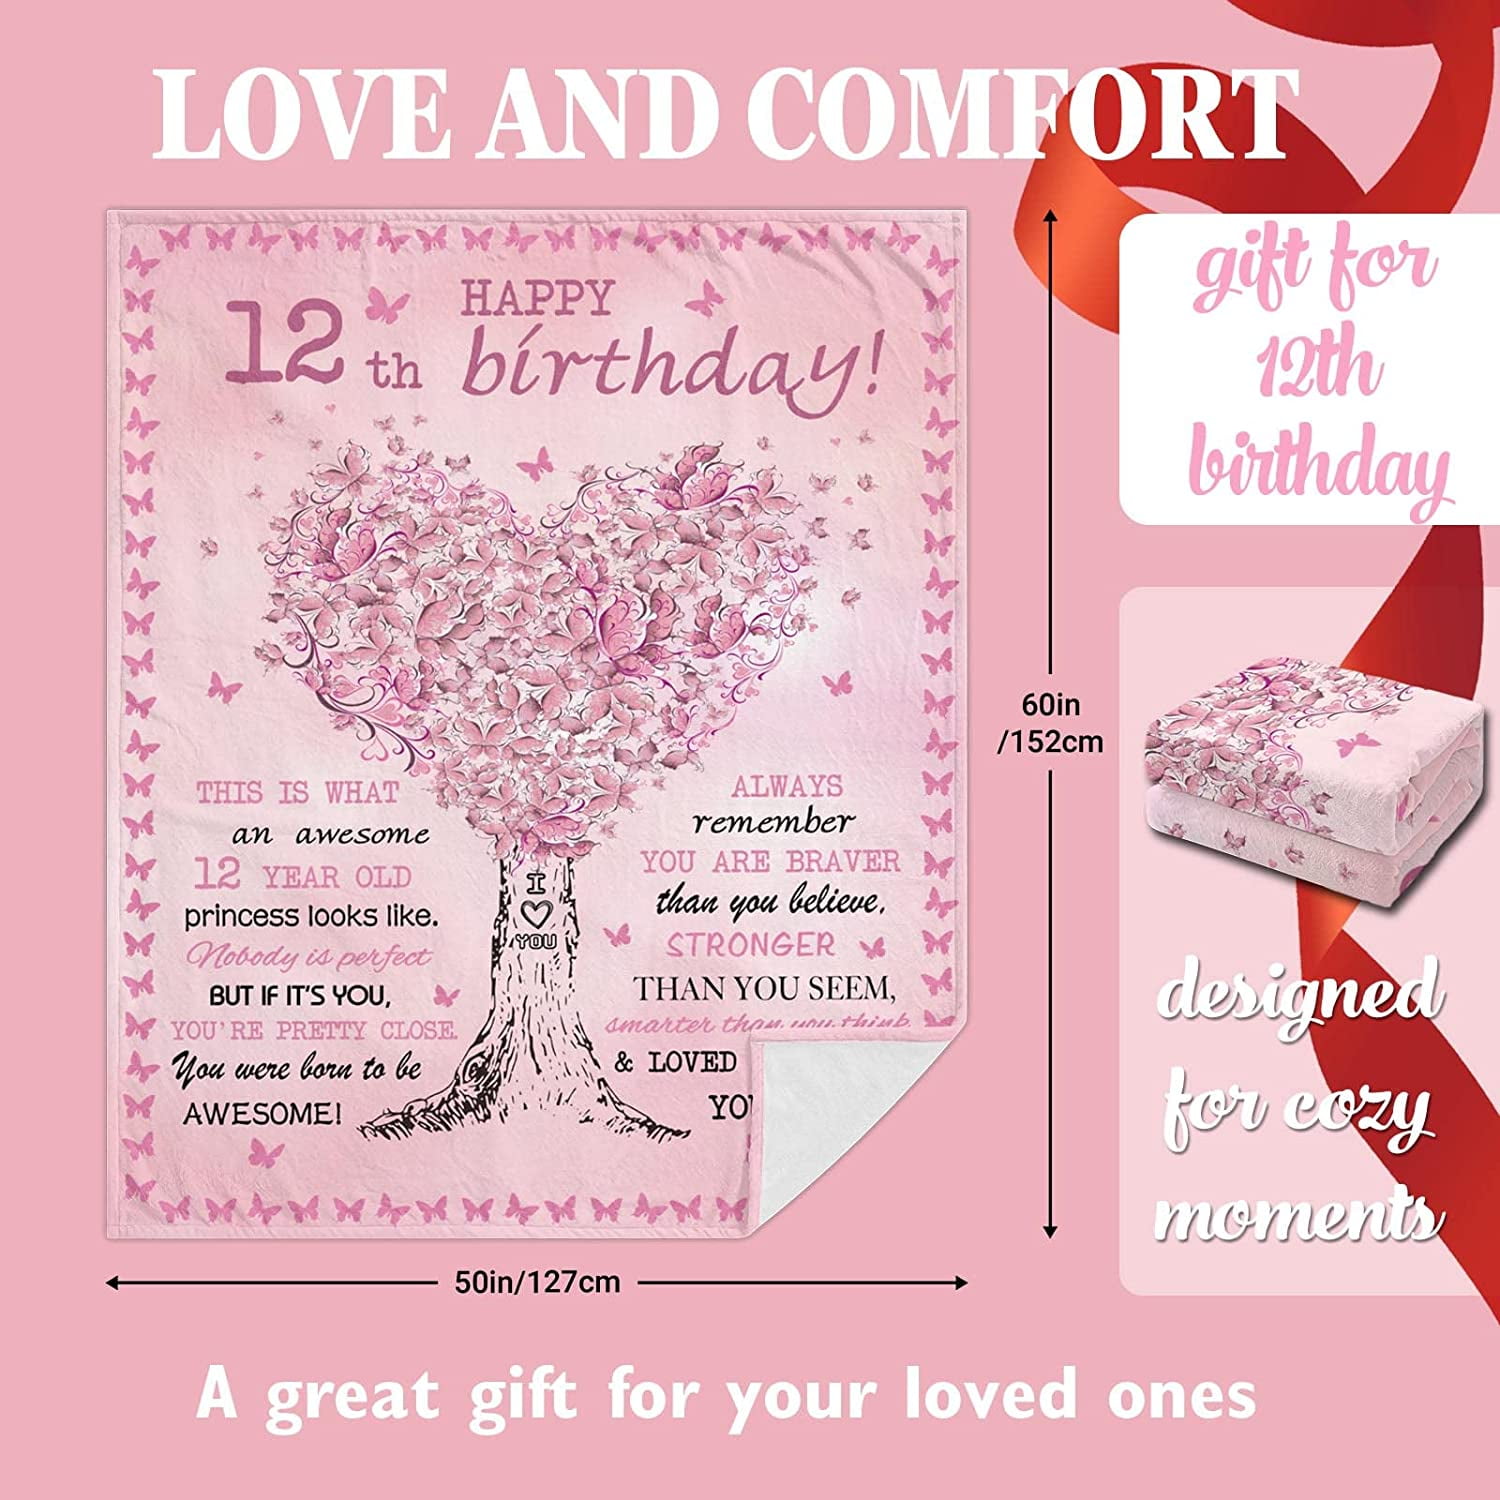 Qotuty Gifts for 14 Year Old Girl, 14 Year Old Girl Gift Ideas Blanket  50x60, Birthday Gifts for 14 Year Old Girl, 14th Birthday Decorations for